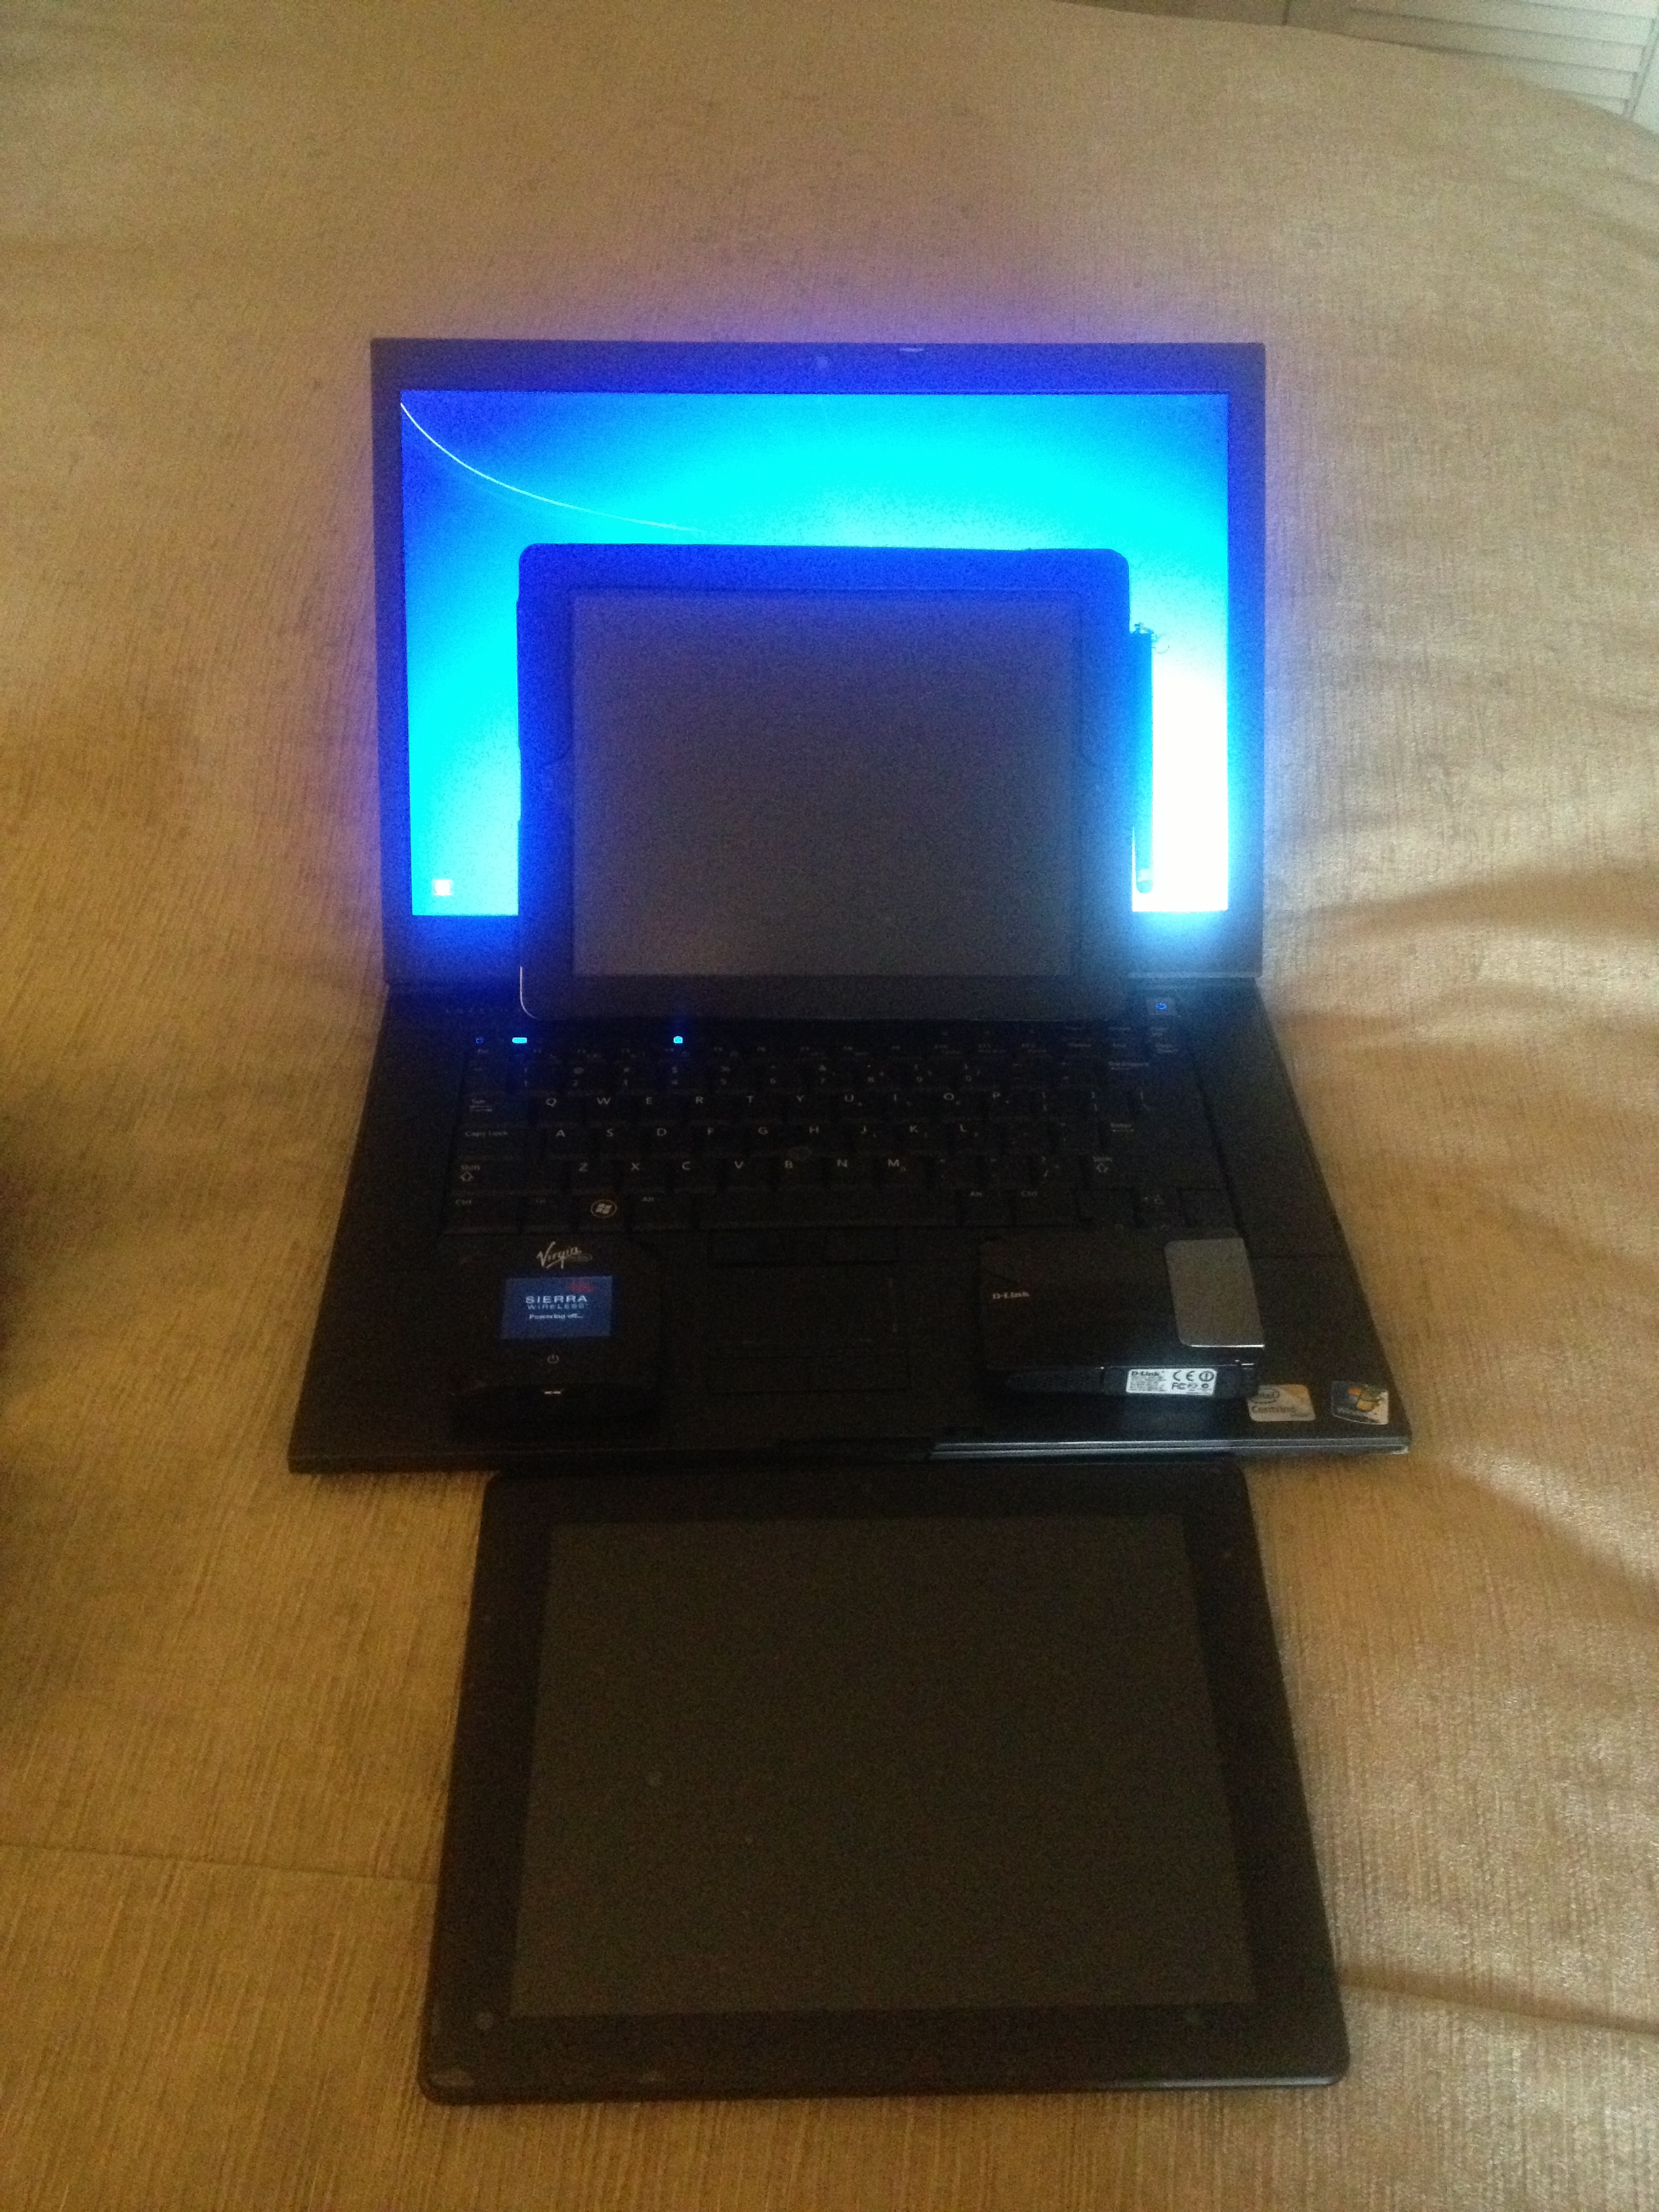 a laptop with a blue light on the screen